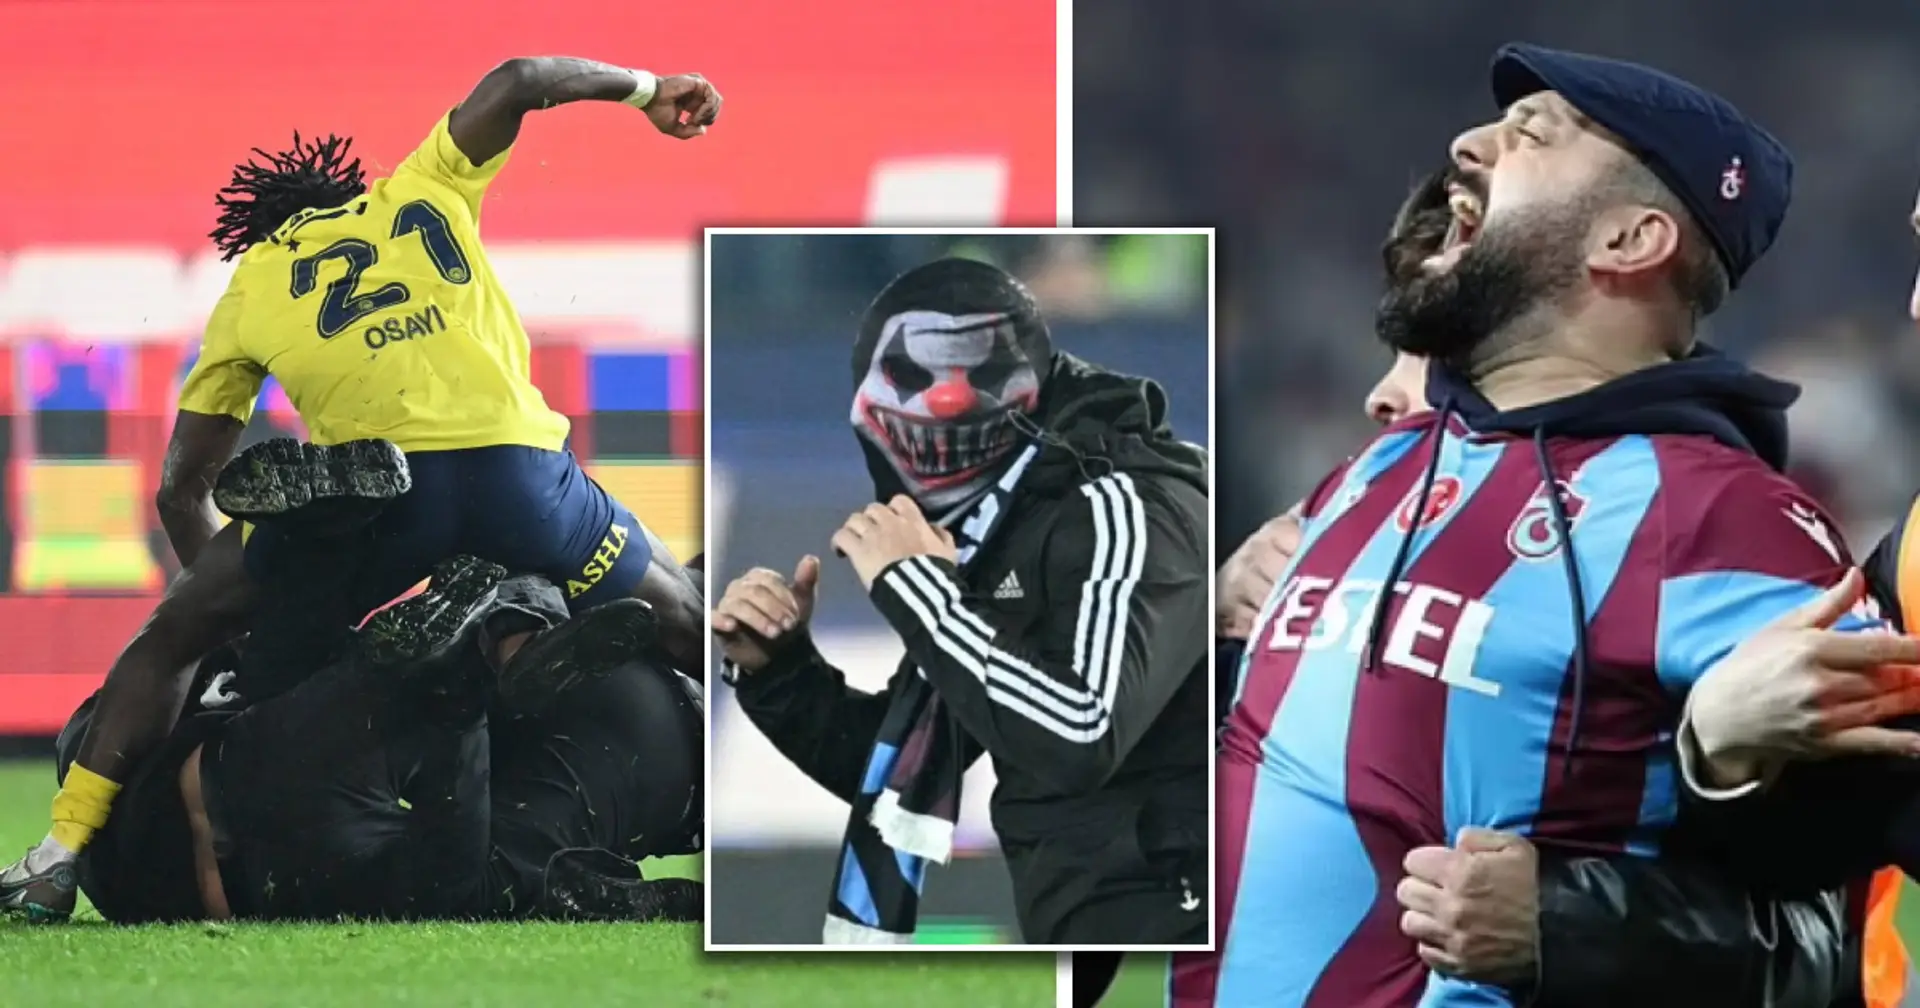 Fenerbahce player throws punches at his attacker after Trabzonspor fans storm the pitch 